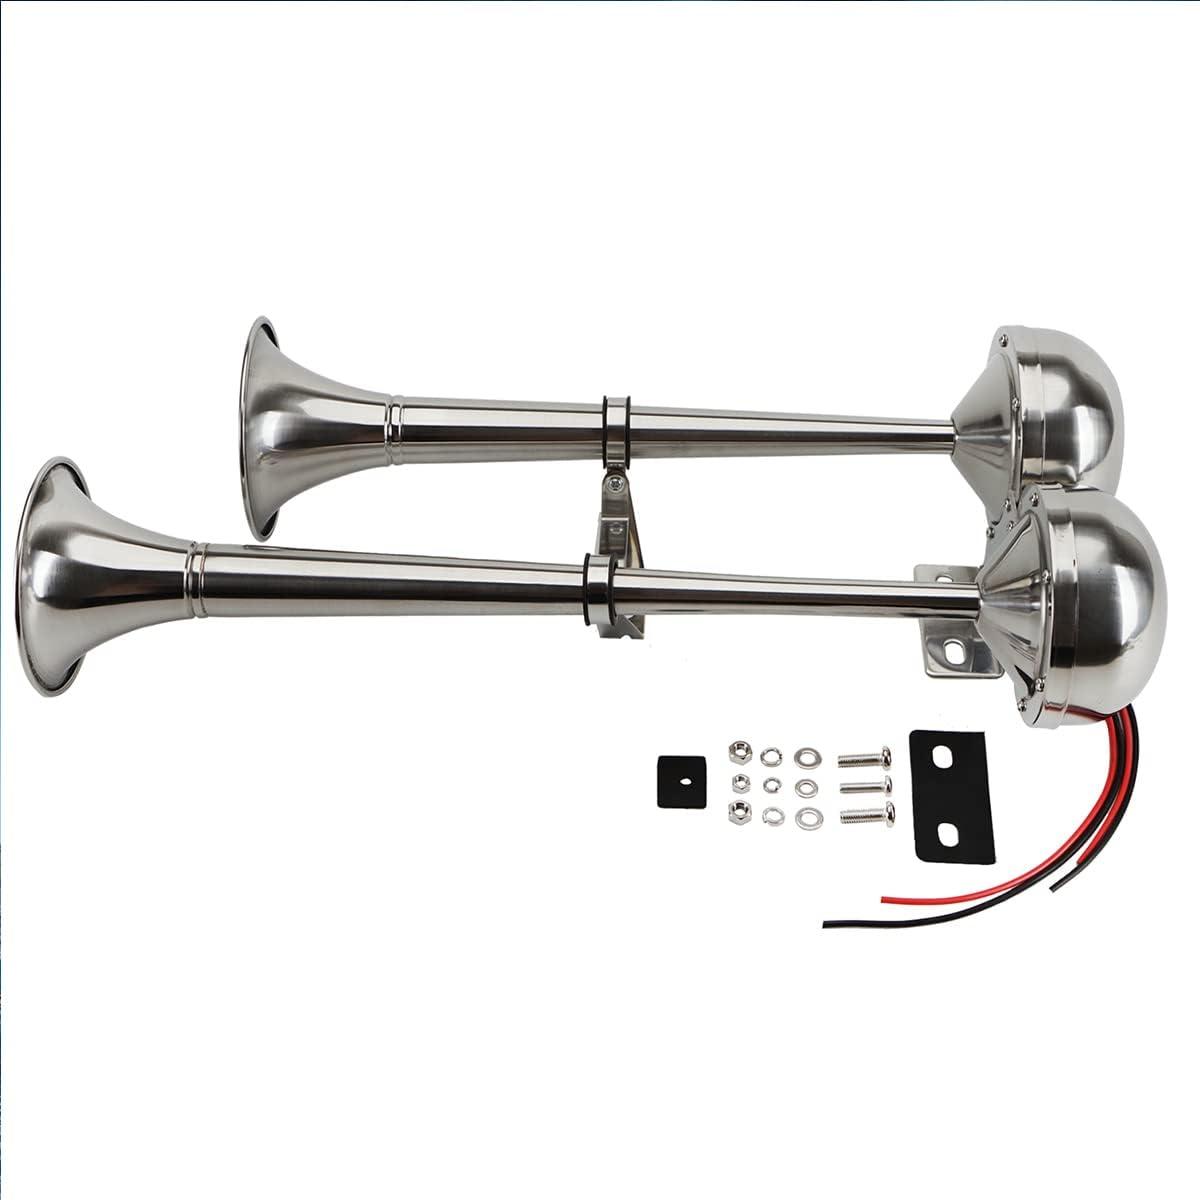 Oversea Boat Sound System 125db Dual Trumpet 12V Small Size Stainless Steel  Electric Horn Marine Grade